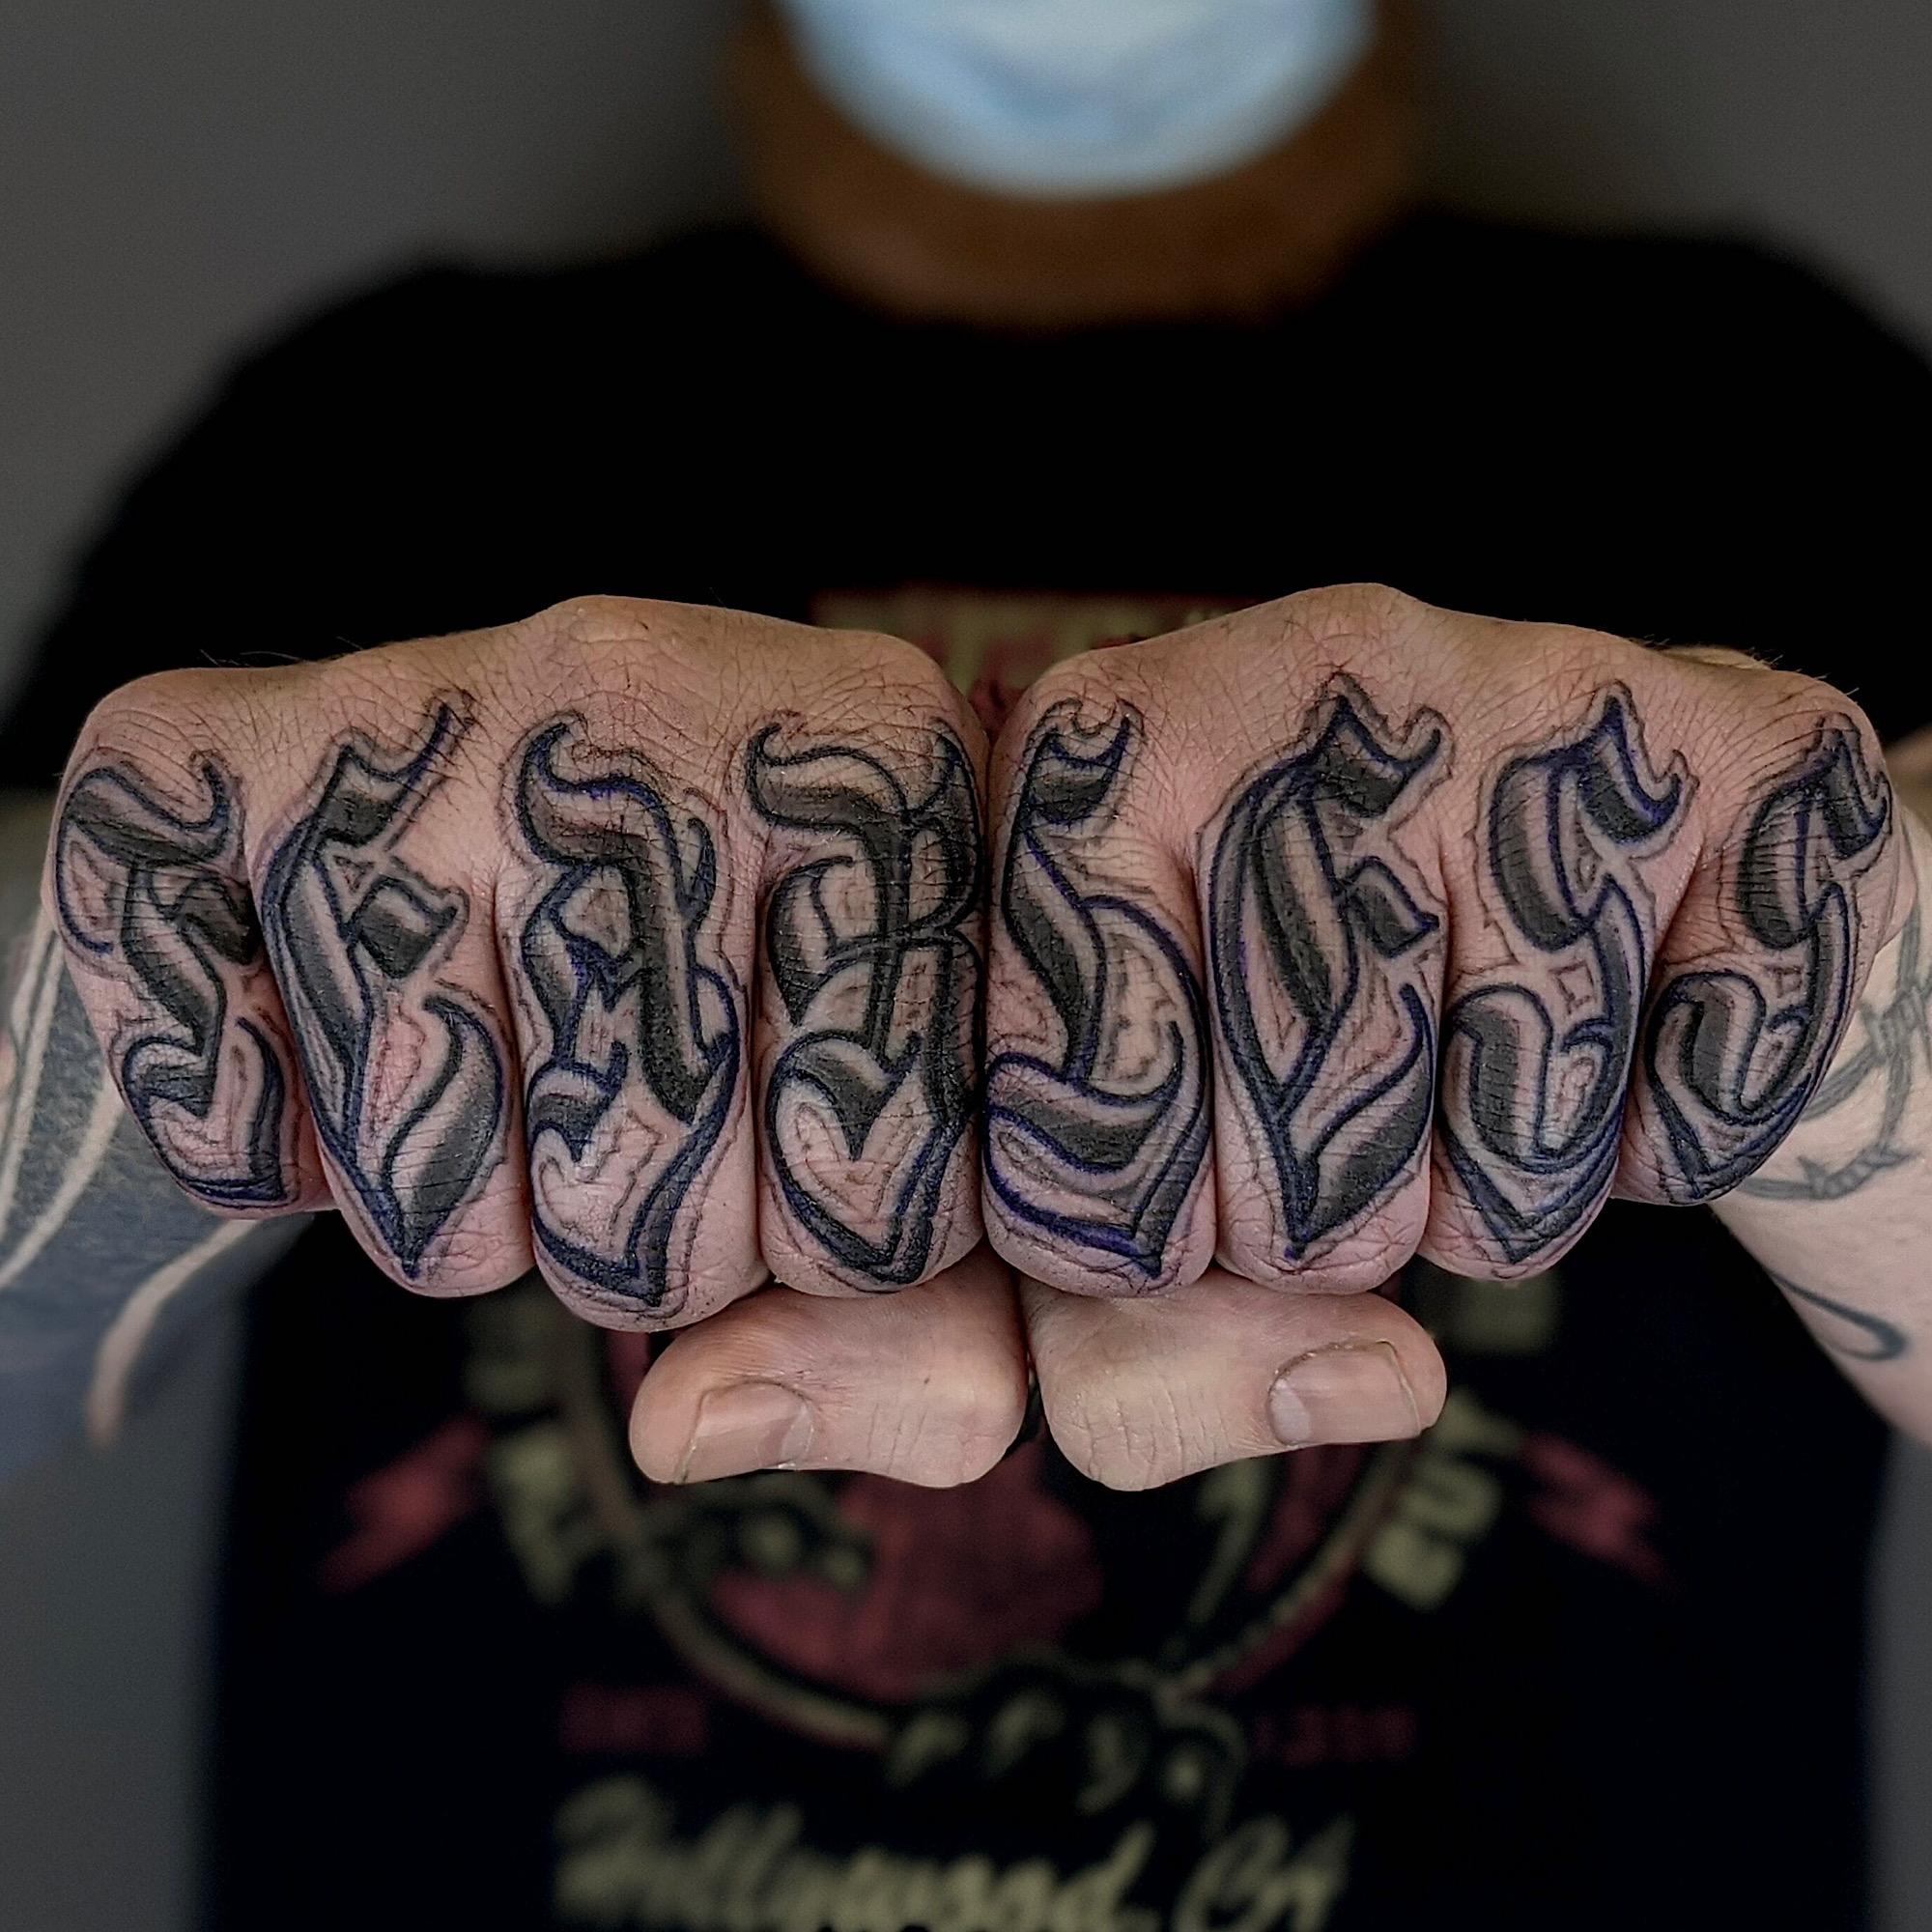 old english blackletter gothic style lettering across fingers love letters black and grey gray lettering hand tattoo by Ricks custom tattooing Ricardo Pedro at Nexus Collective